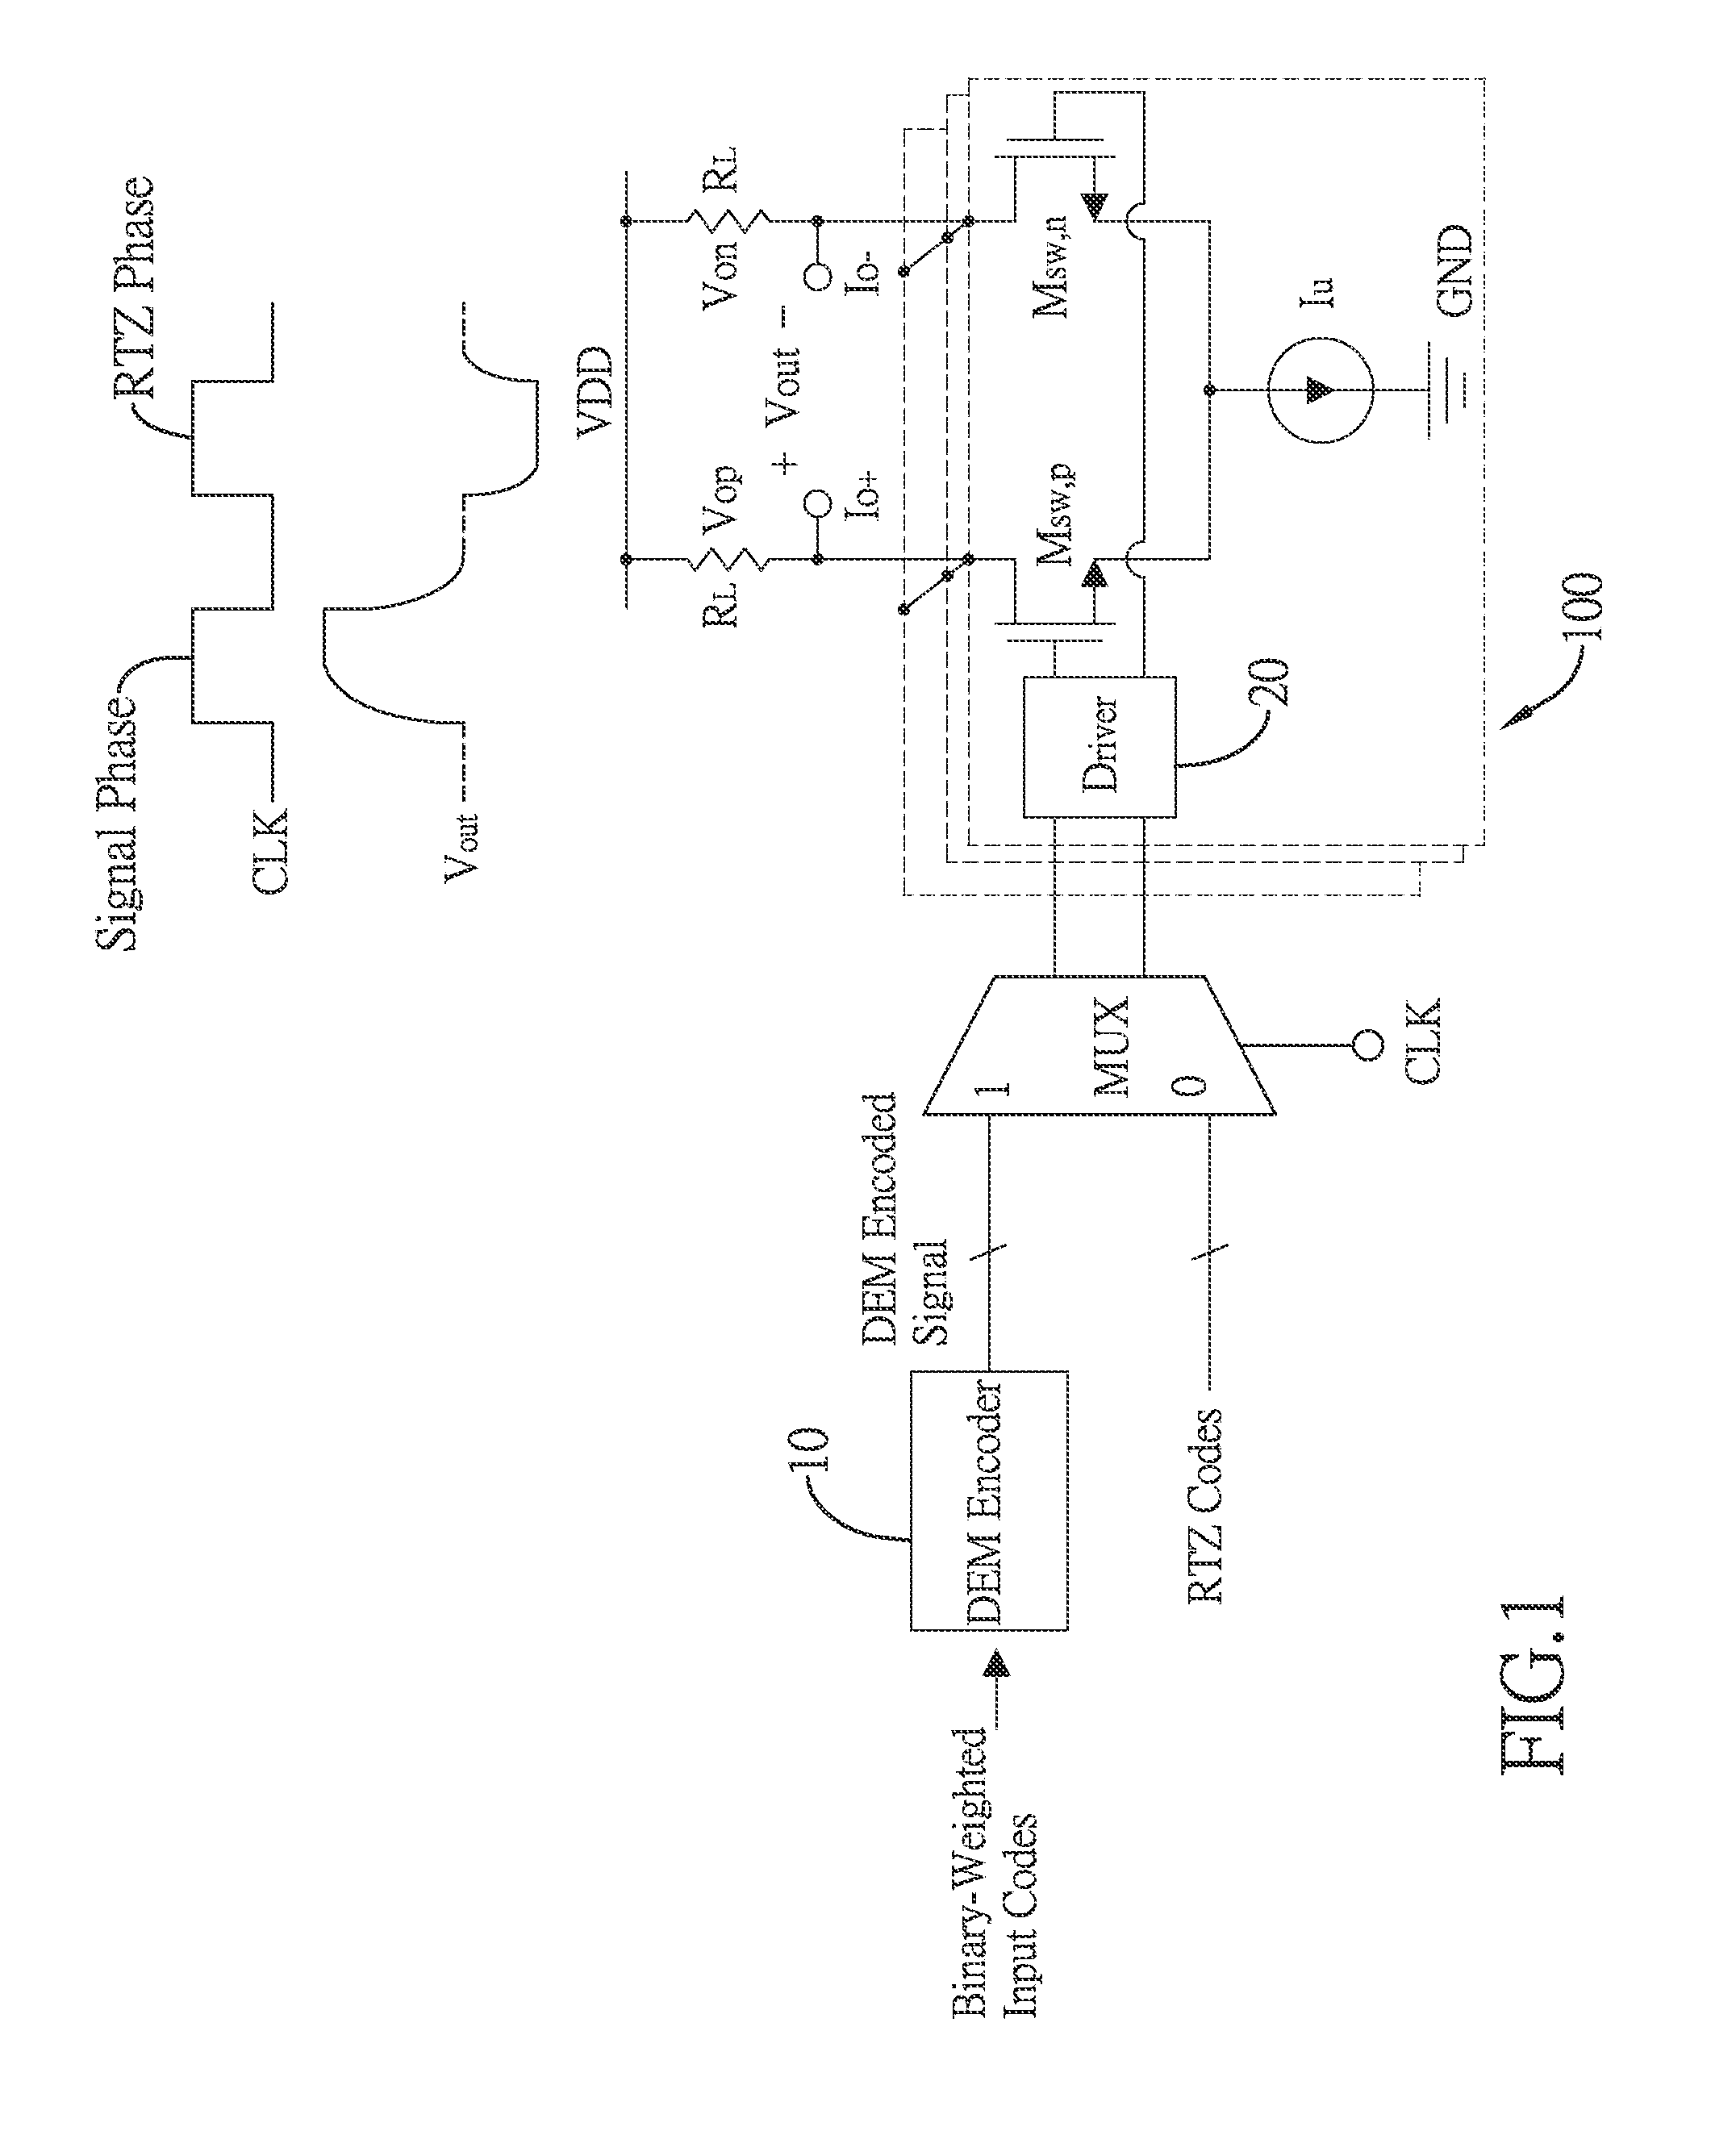 Digital to analog converting method and converter insensitive to code-dependent distortions